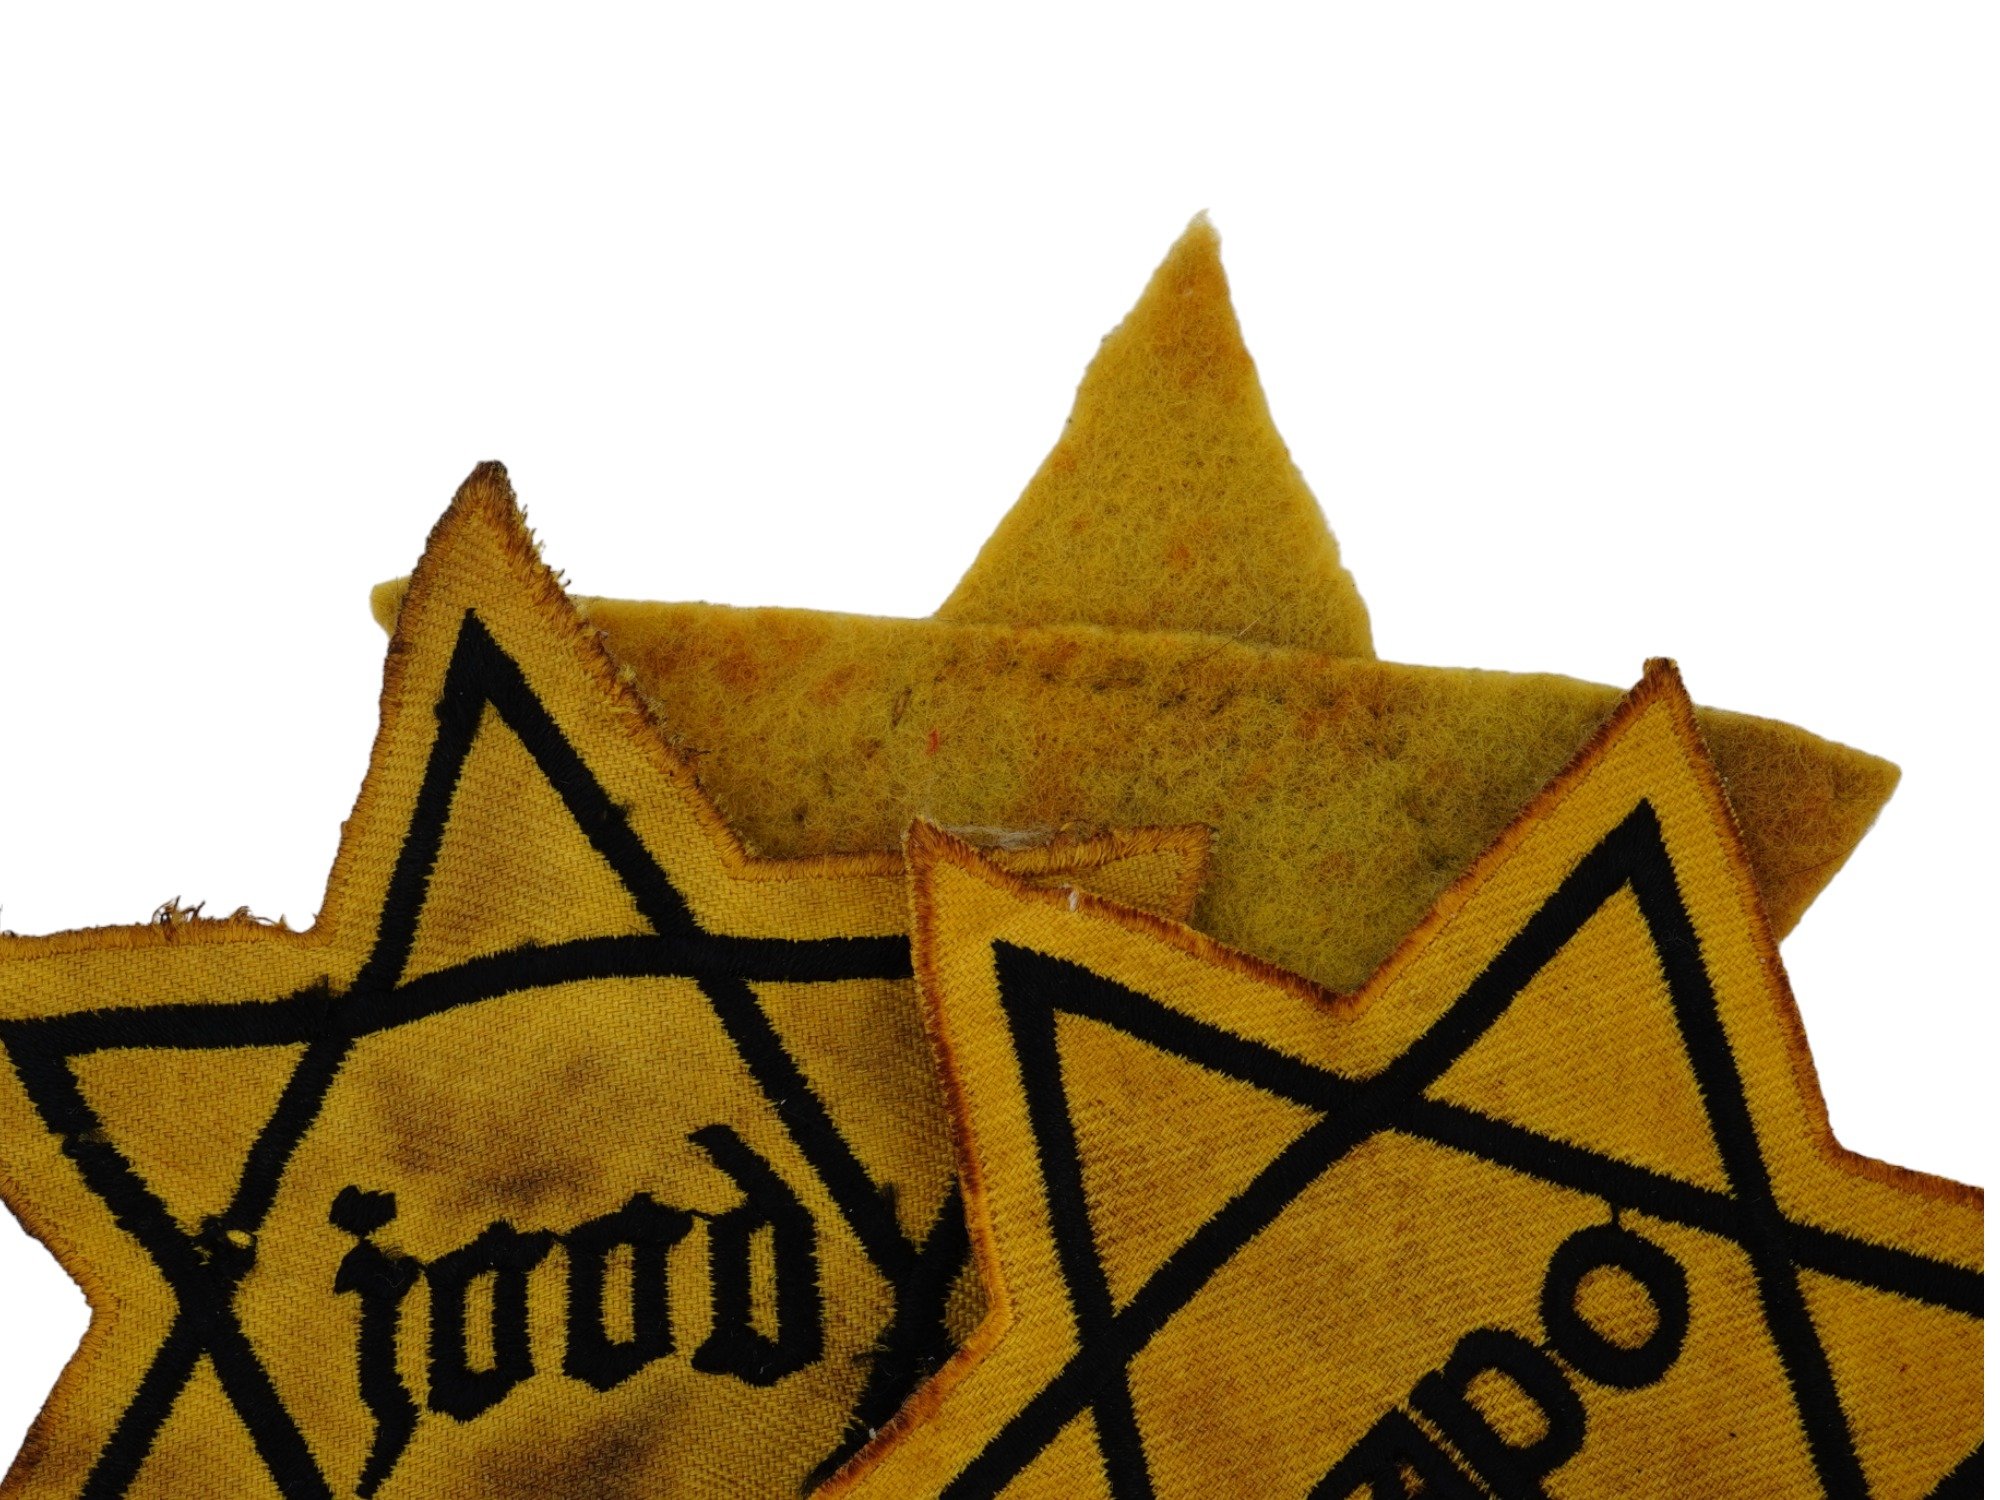 GROUP OF 3 HOLOCAUST PERIOD STARS OF DAVID ARMBANDS PIC-2